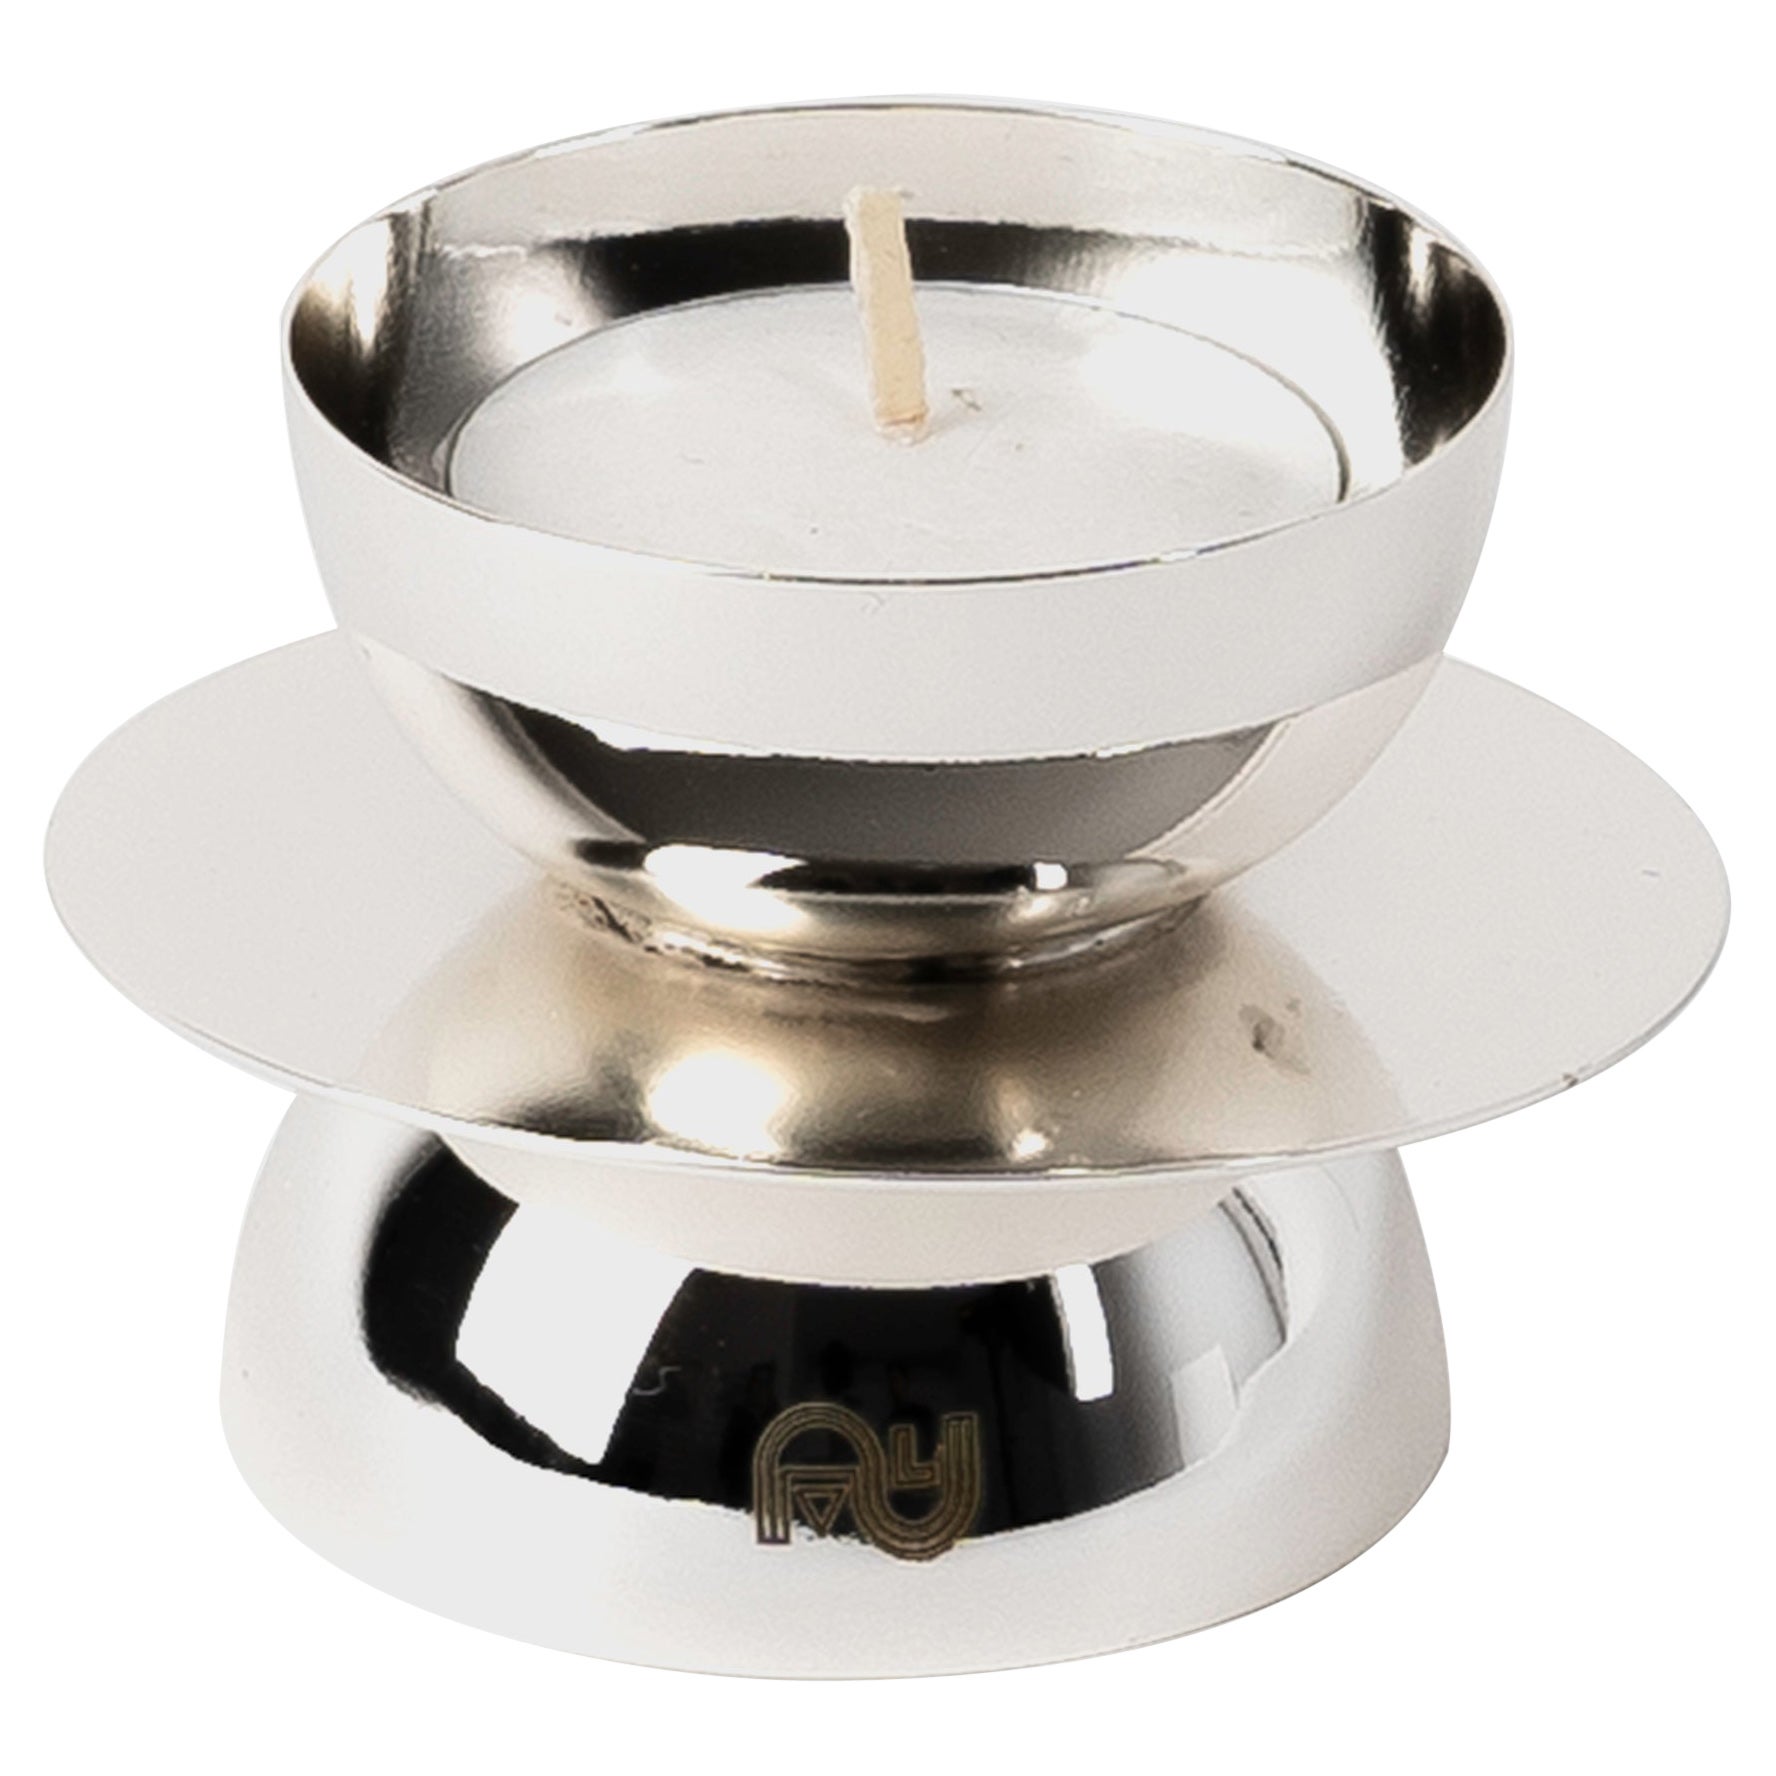 Contemporary Modern, Kubbe Round Tealight Holder, Varnished Silver Nickel Plated For Sale